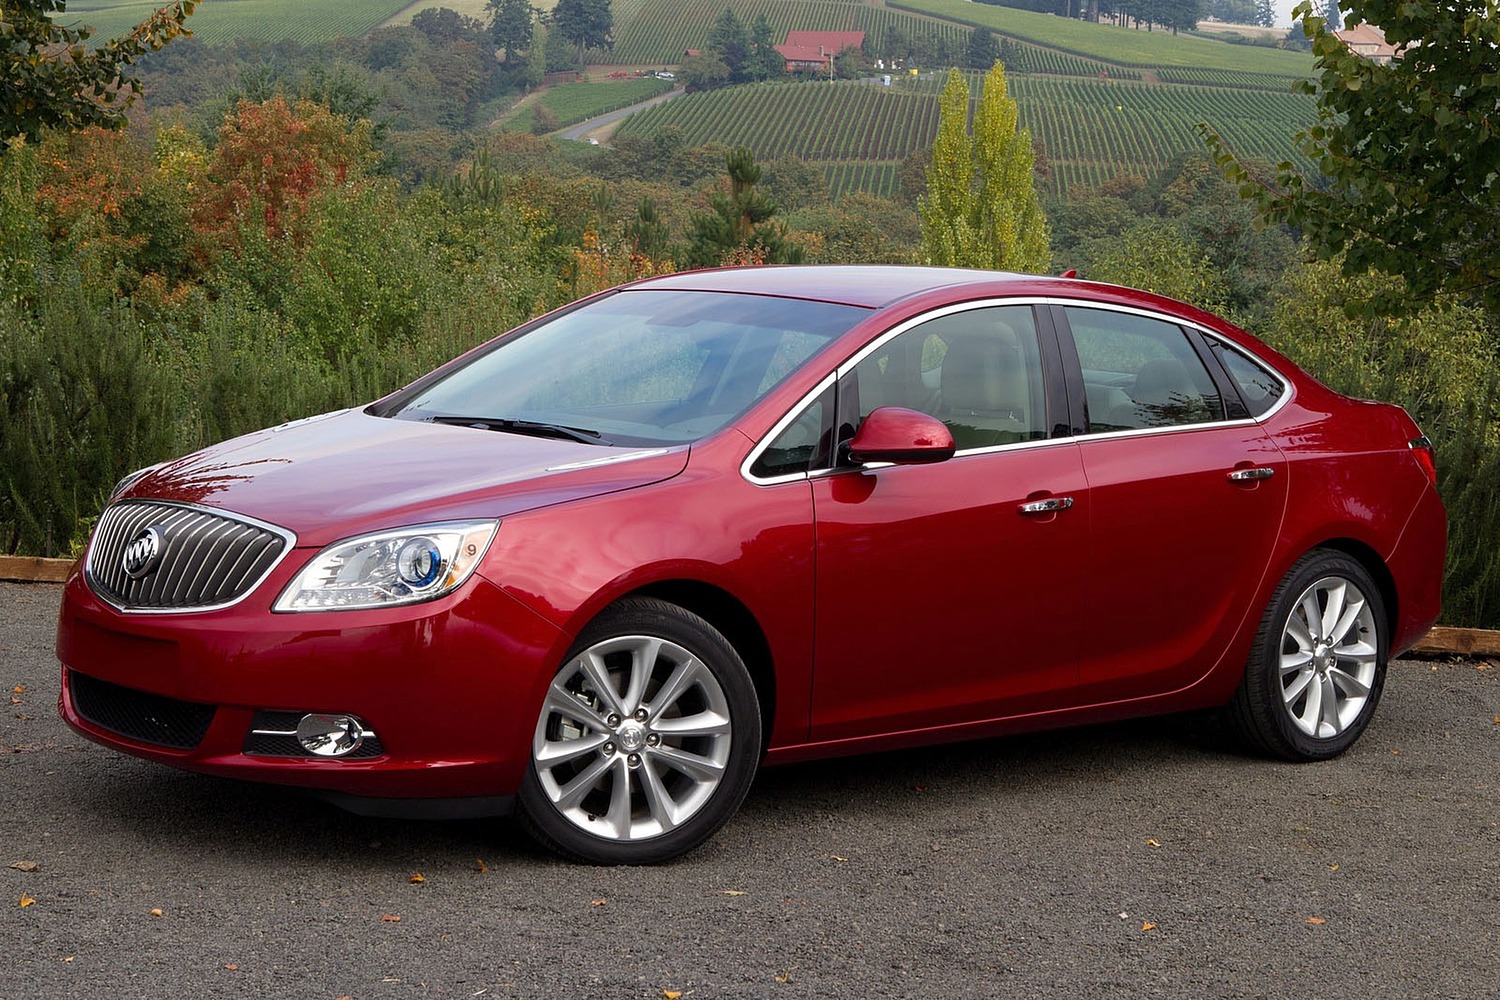 Buick Verano Leather Group Sedan Exterior Shown (2015 model year shown)